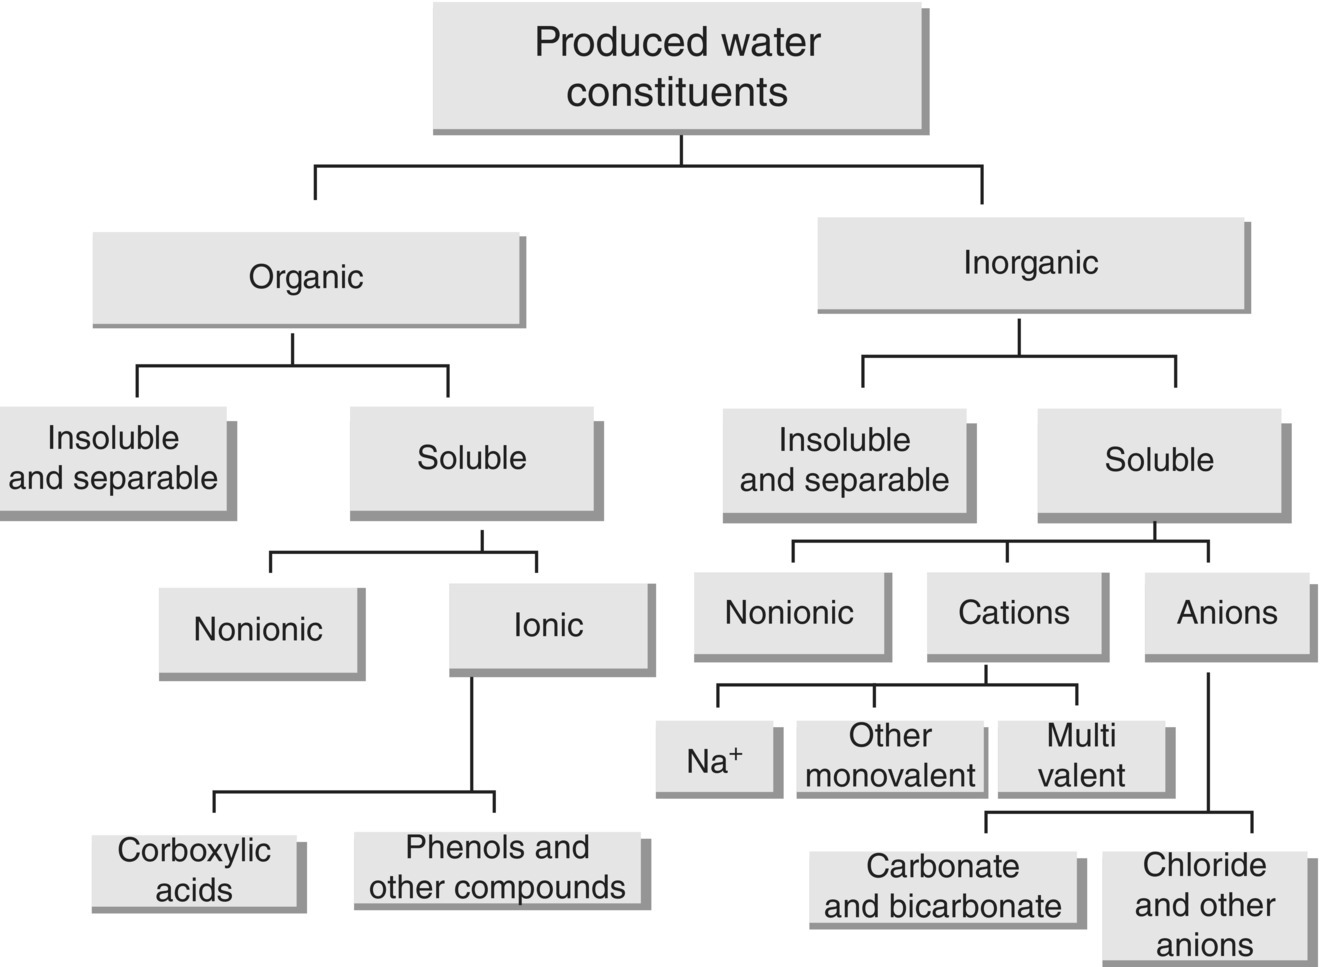 Tree diagram displaying produced water constituents branching to organic and inorganic, with both branching to insoluble and separable and soluble. Soluble under inorganic branches to nonionic, cations, and anions.